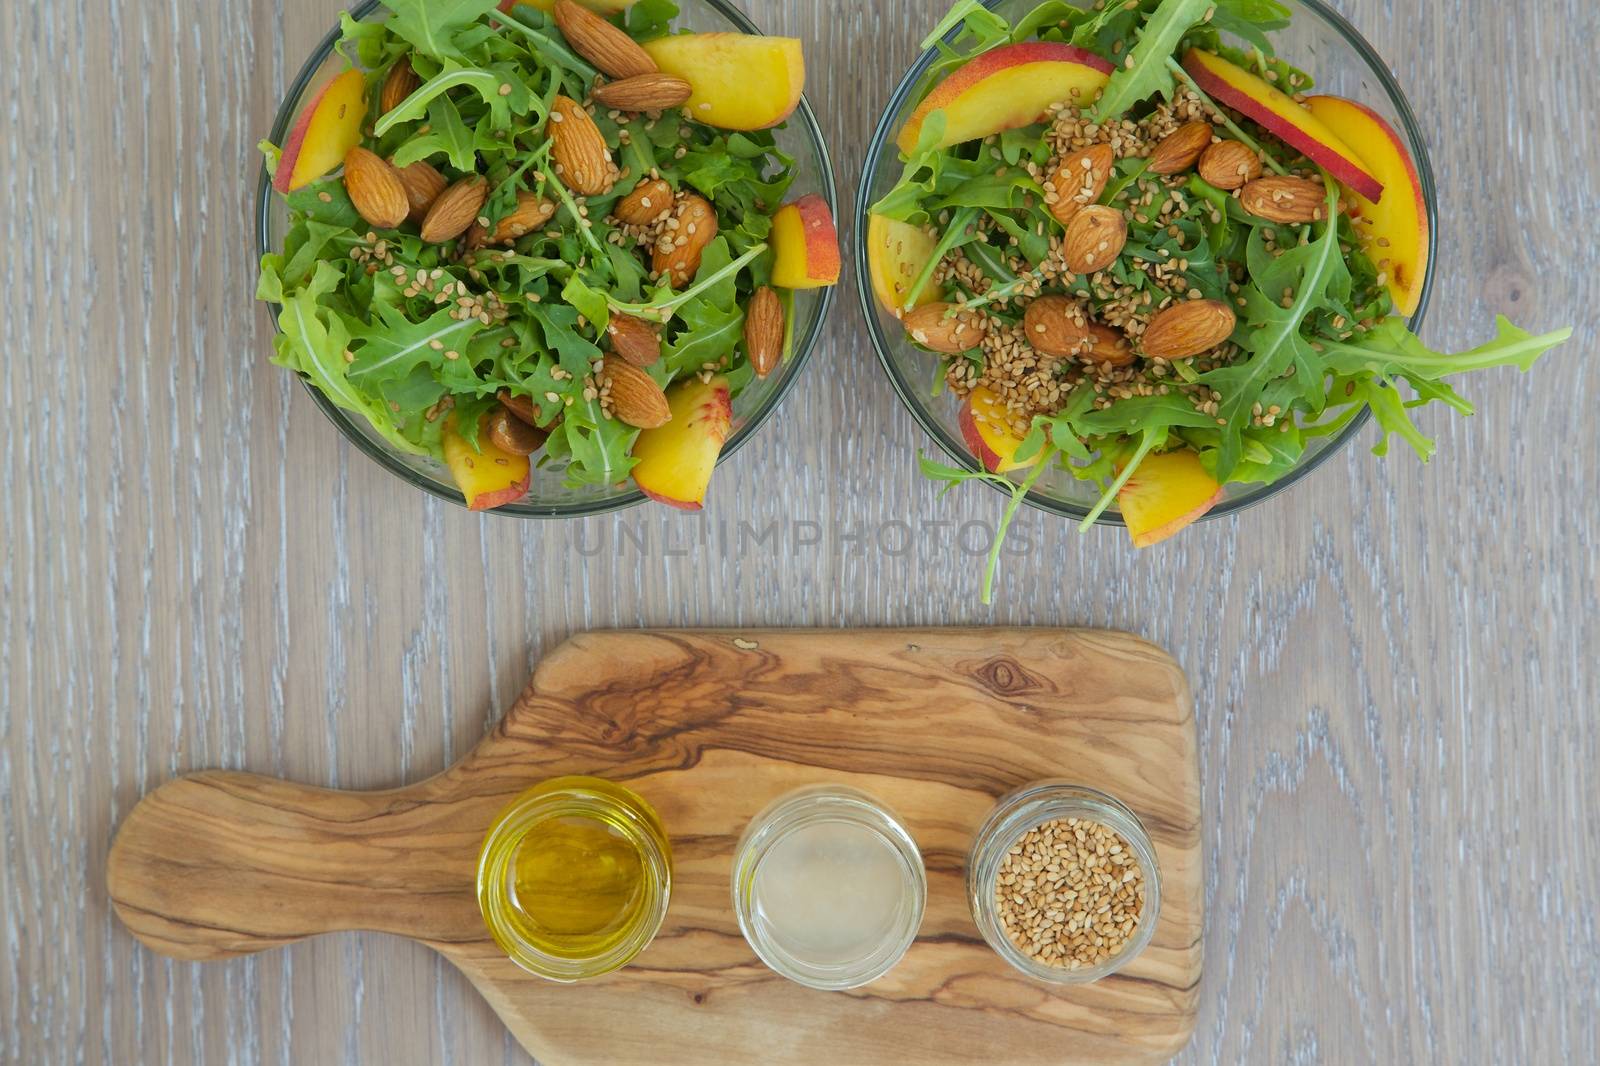 Vitamin salad- rucola with almond, peach and sesame seeds in glass dishes. Olive oil, lemon juice and sesame seeds on the wooden cutting board. Background. Top view